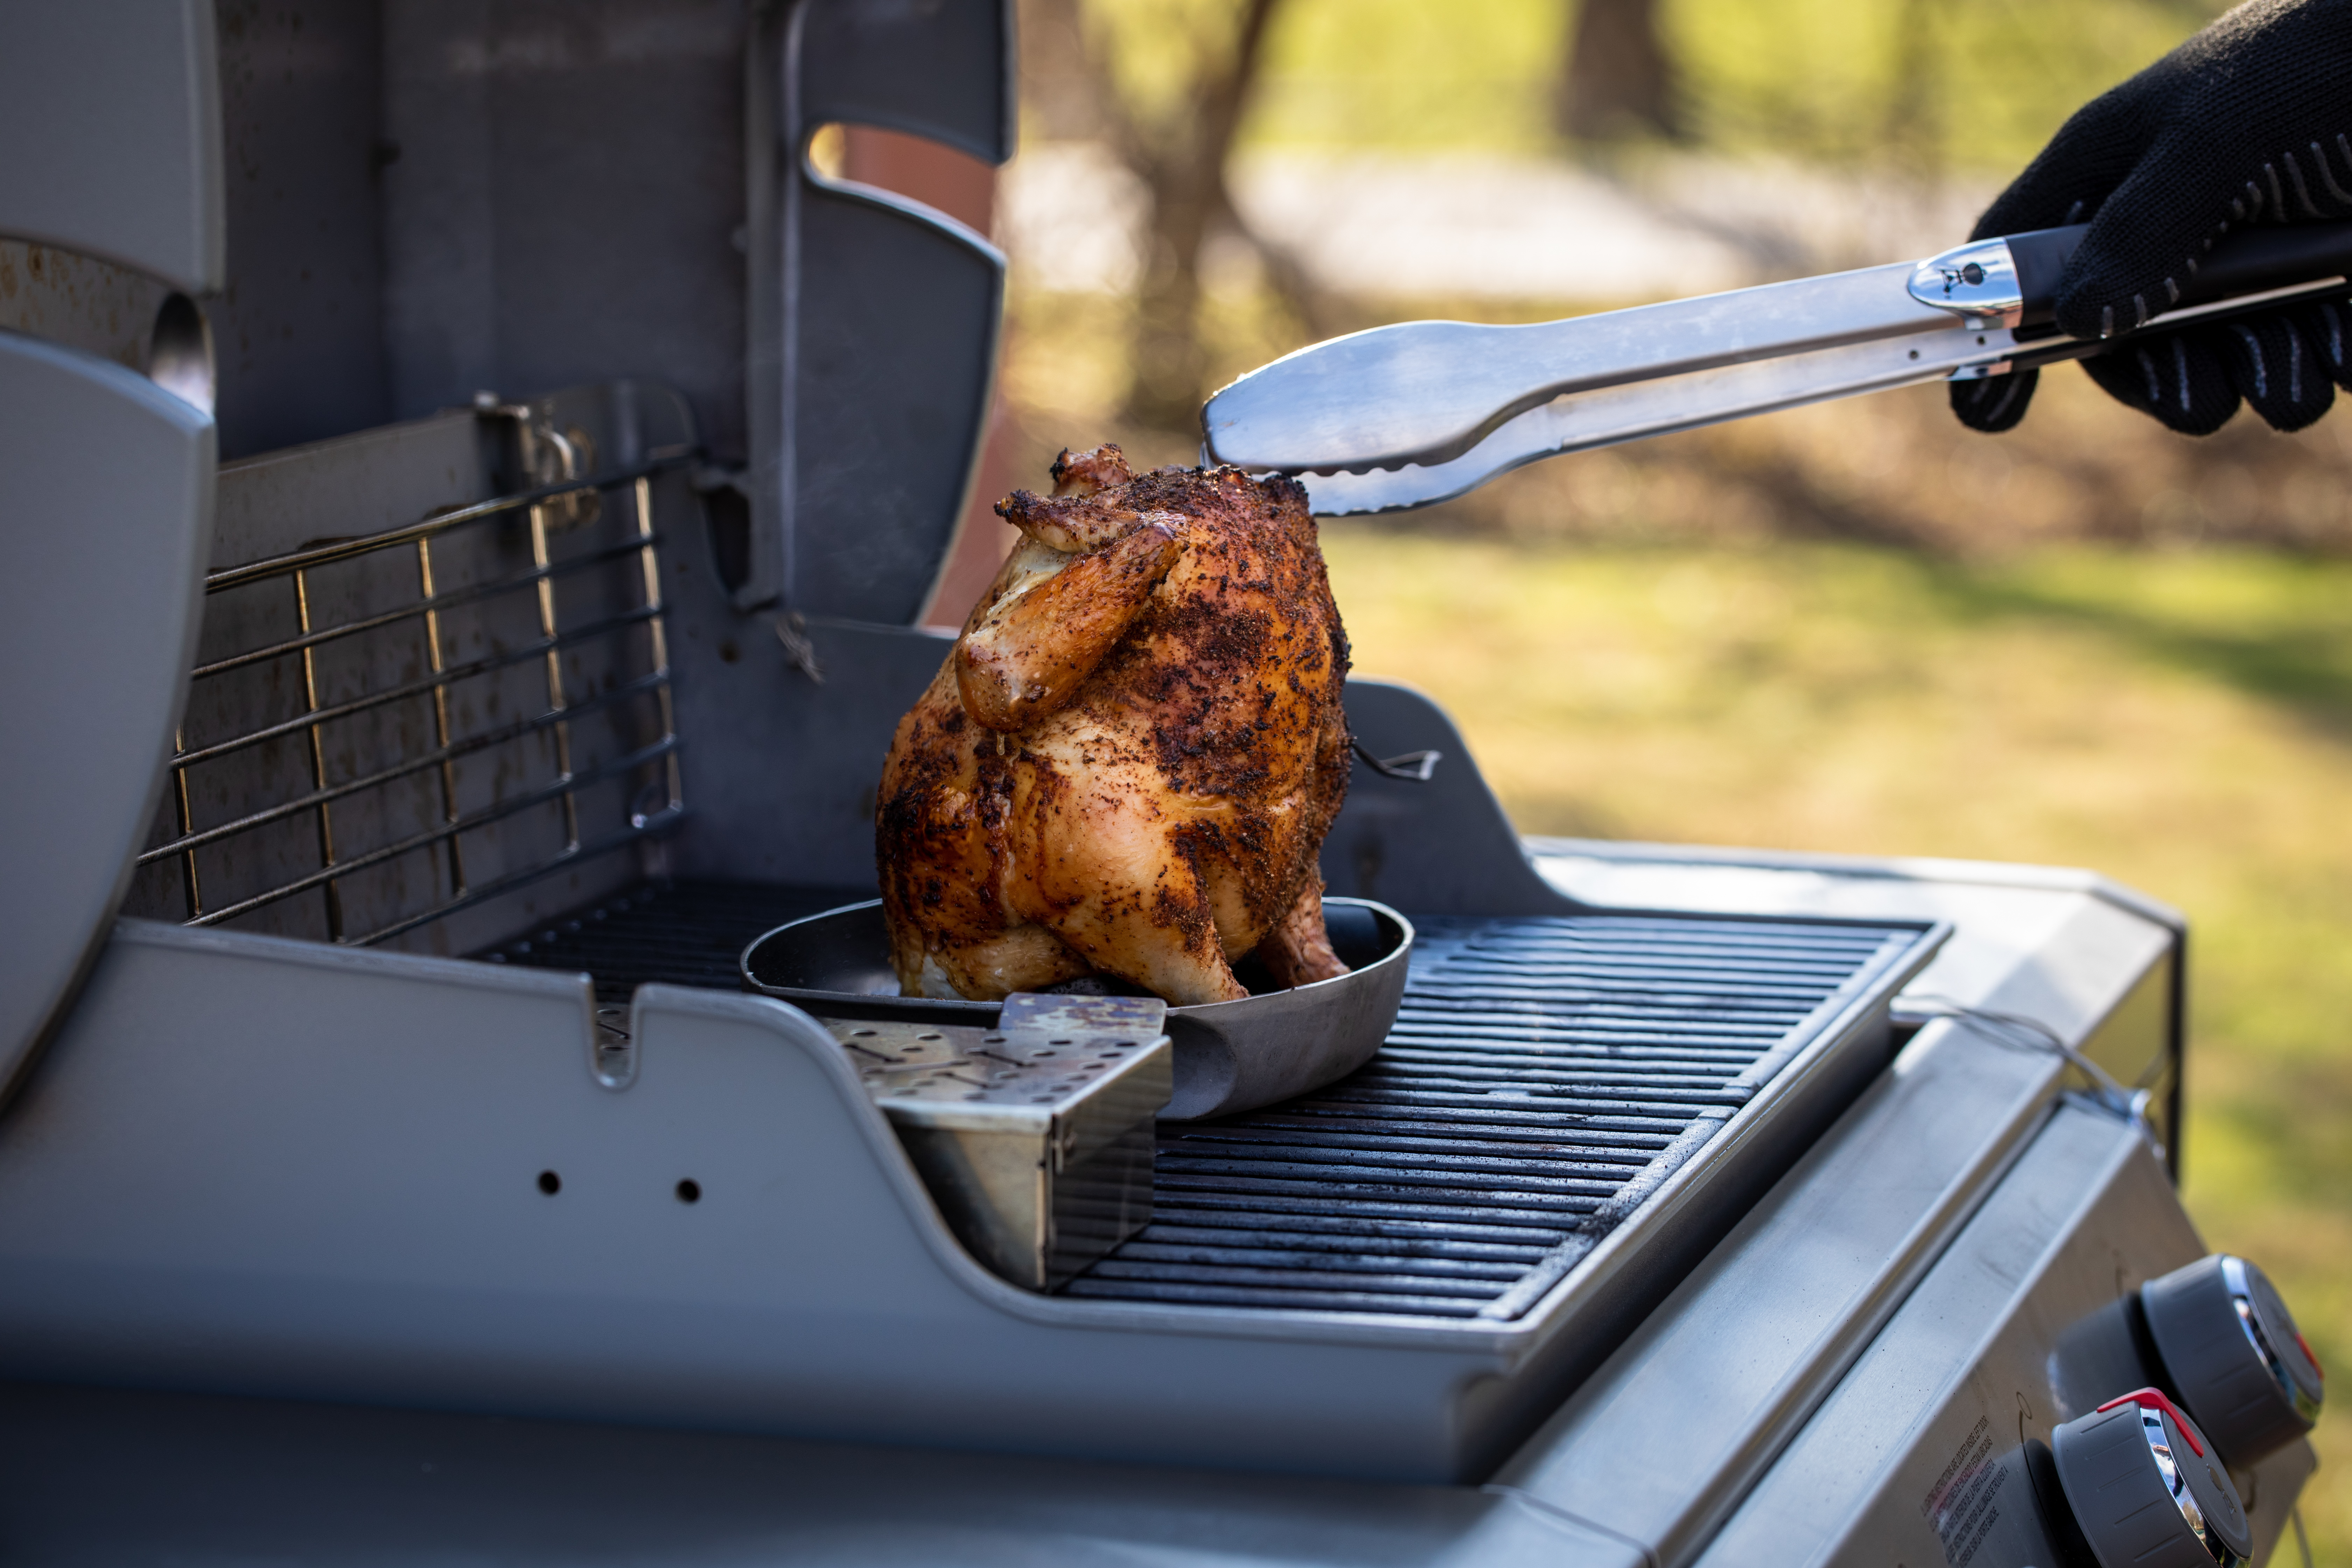 Navaris Vertical Stainless Steel Chicken Roaster Stand for Roasting Grilling Poultry BBQ Beer Can Chicken Rack Holder with Drip Pan and Canister